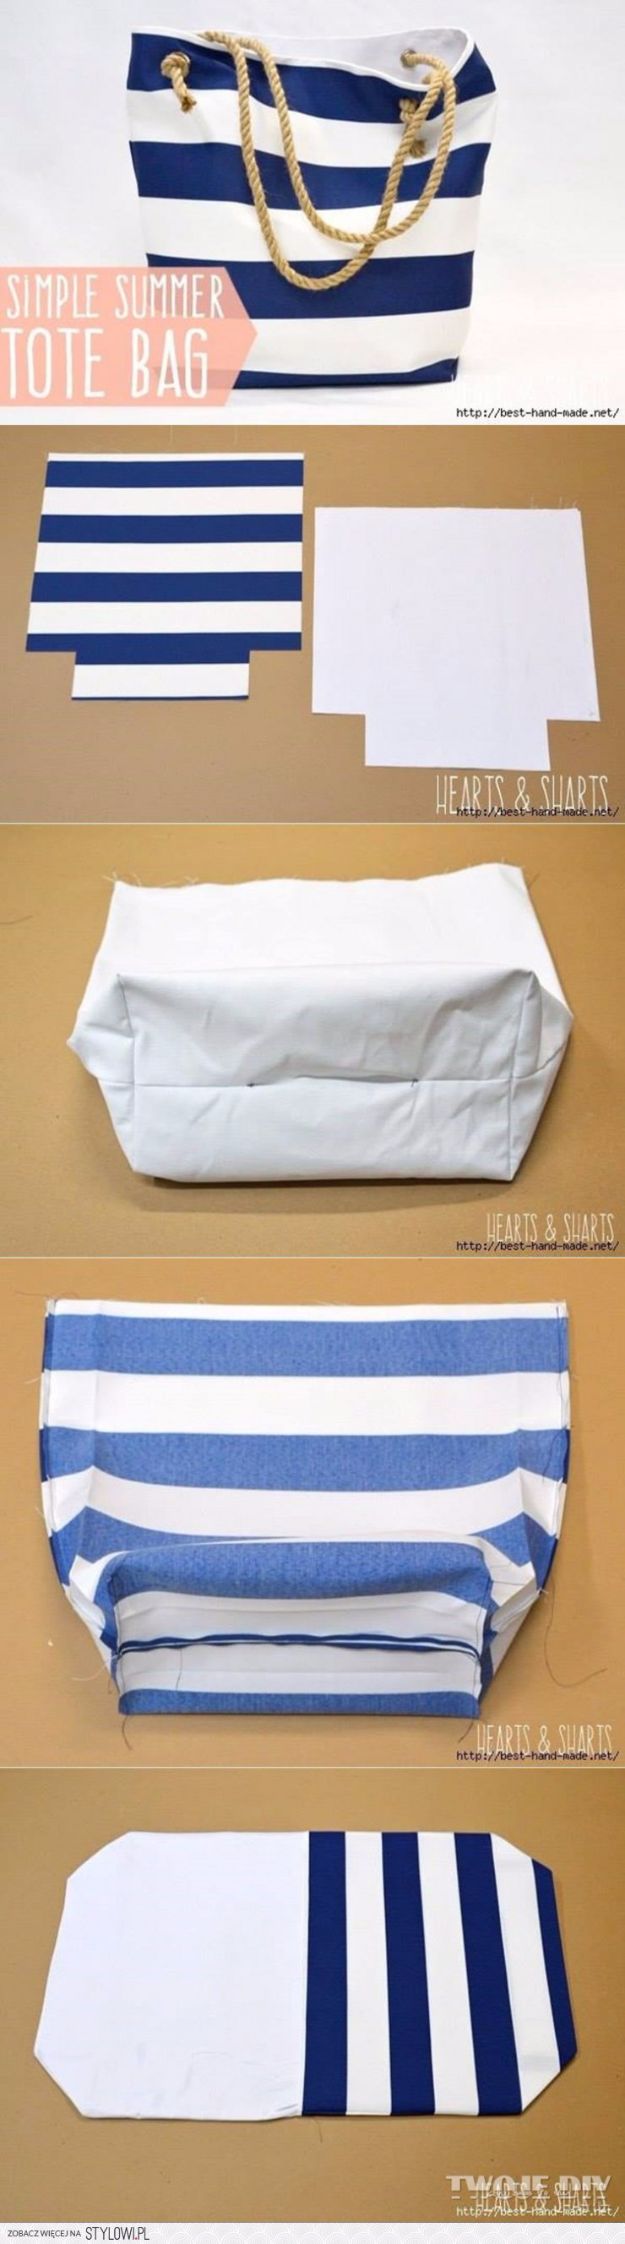 DIY Bags for Summer - Simple Summer Tote Bag - Easy Ideas to Make for Beach and Pool - Quick Projects for a Bag on A Budget - Cute No Sew Idea, Quick Sewing Patterns - Paint and Crafts for Making Creative Beach Bags - Fun Tutorials for Kids, Teens, Teenagers, Girls and Adults